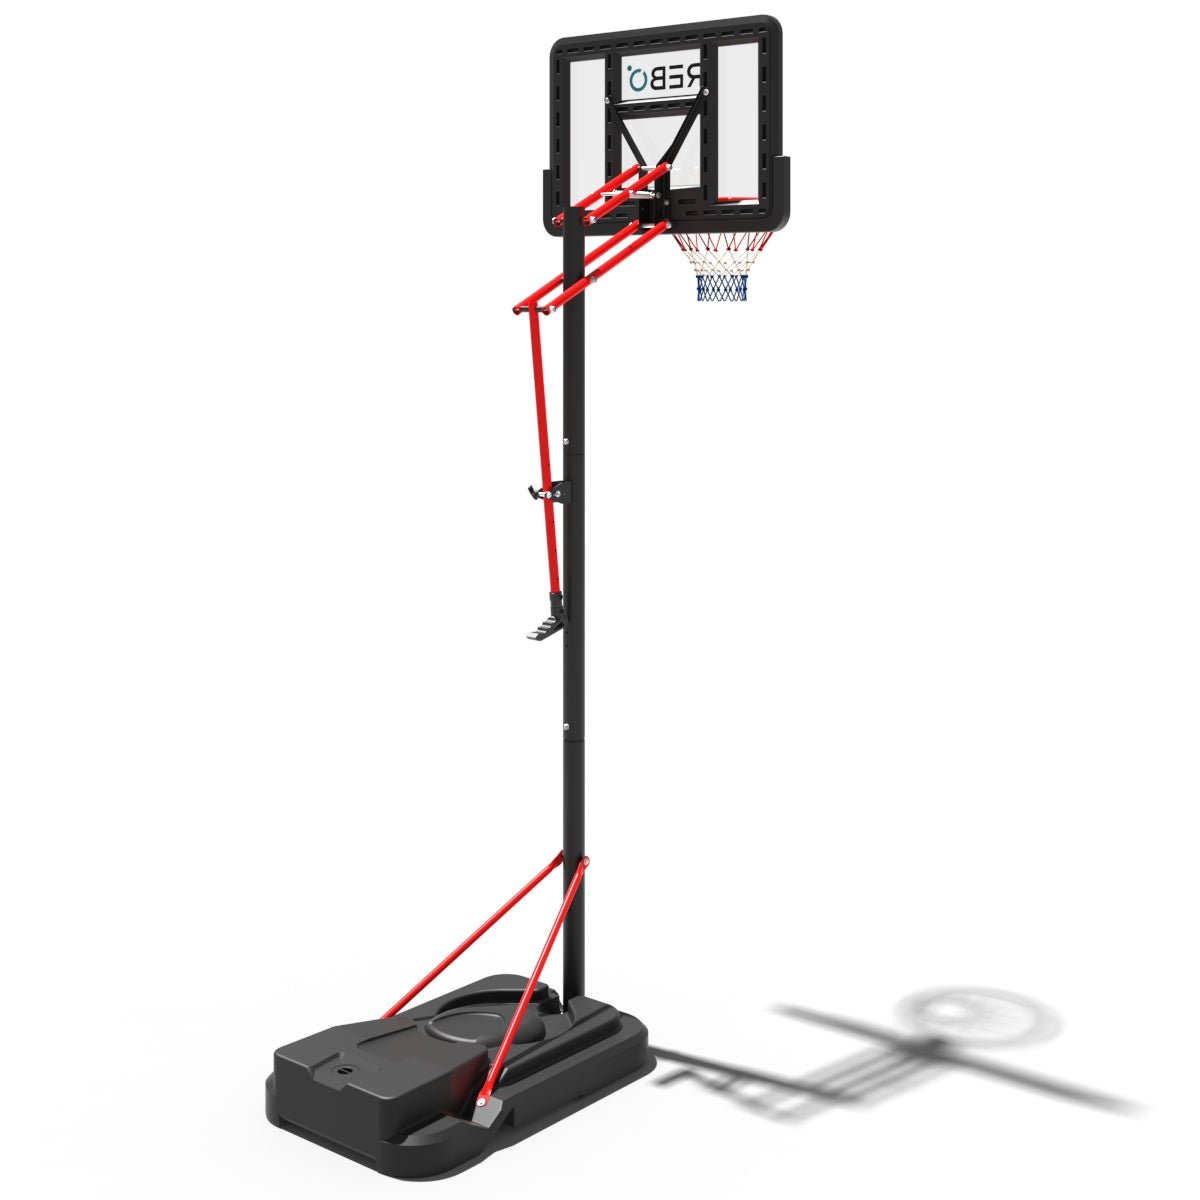 Rebo Freestanding Portable Basketball Hoop with Stand Adjustable Height - Large